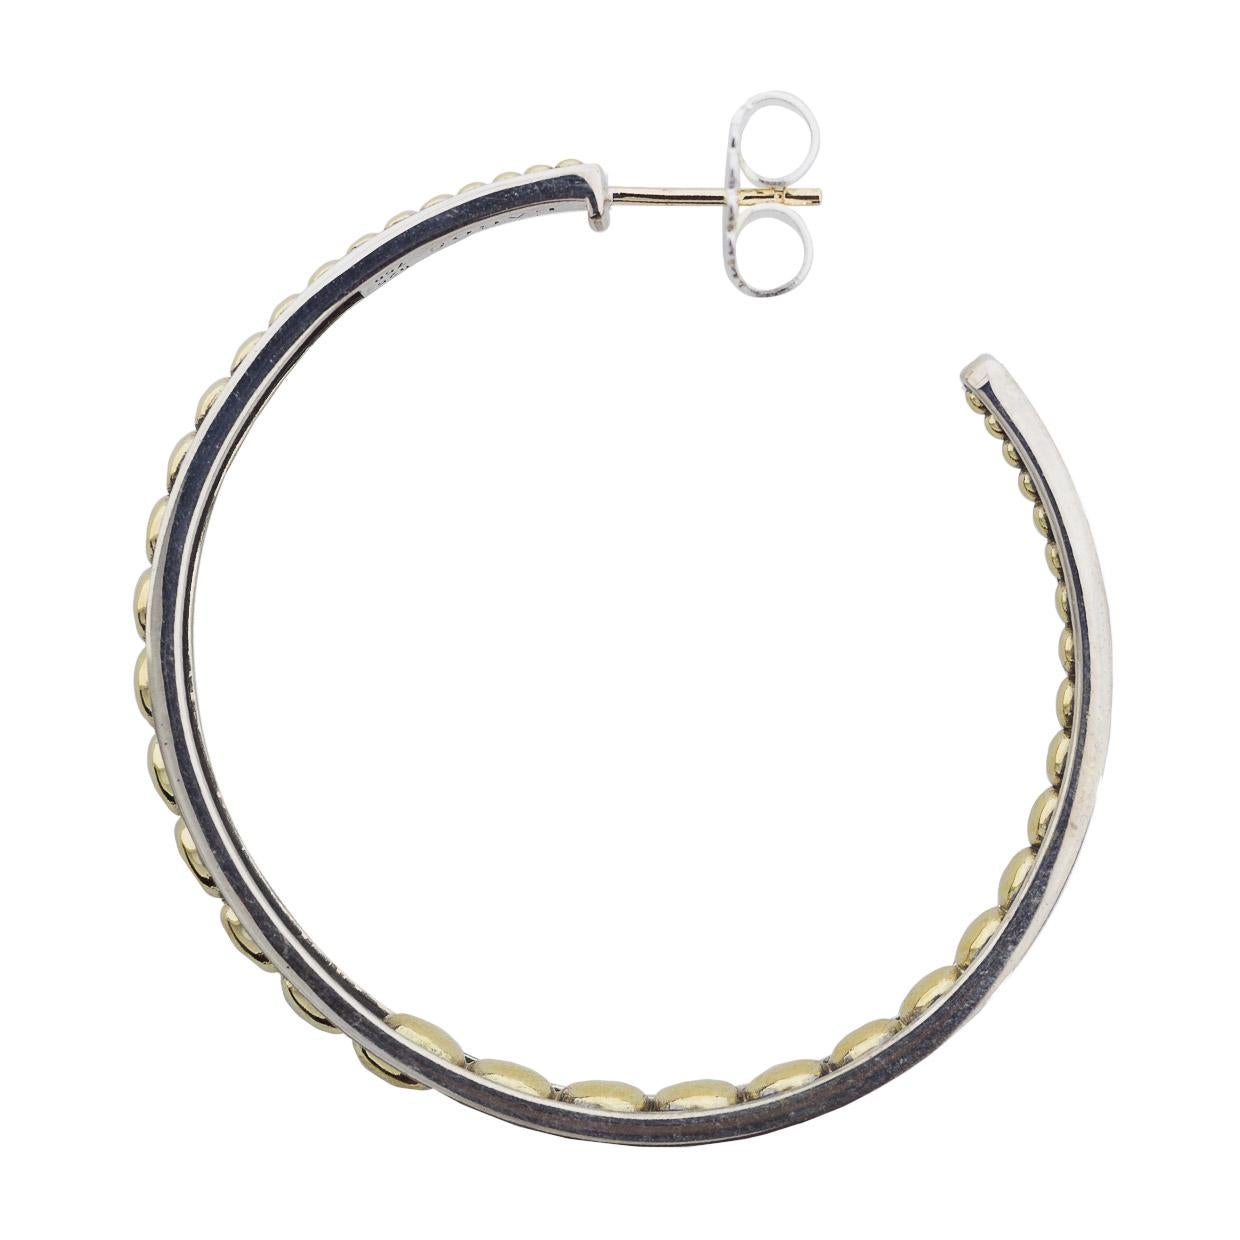 Item Details
Estimated Retail $1,250.00
Brand Lagos
Collection Signature Caviar
Metal 925 Sterling Silver & 18kt Yellow Gold
Finish Polished
Style Hoop
Fastening Butterfly/tension
Length x Width 50 X 6 mm
Diameter 50.00 mm
Metal Purity 925/18k

In